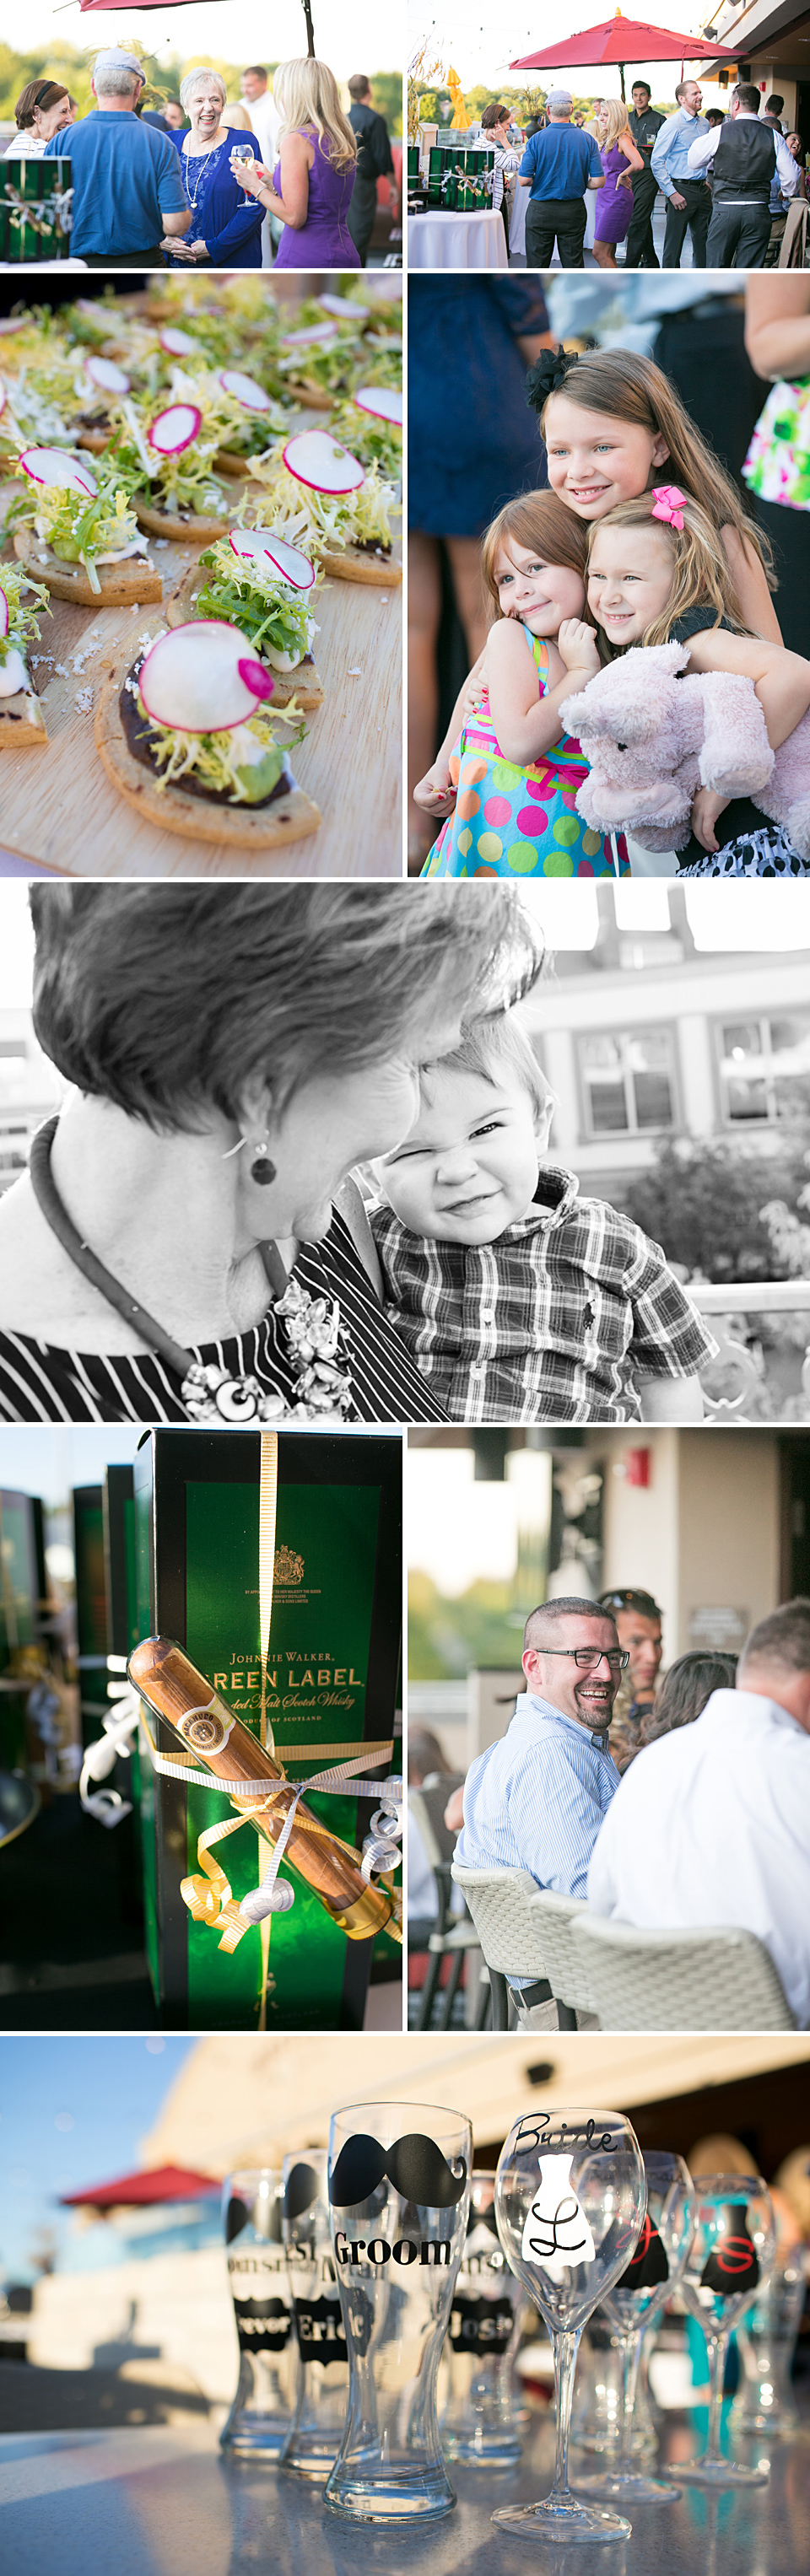 Smith family, funny faces, cigar gifts, candid photographer, Zona Rosa